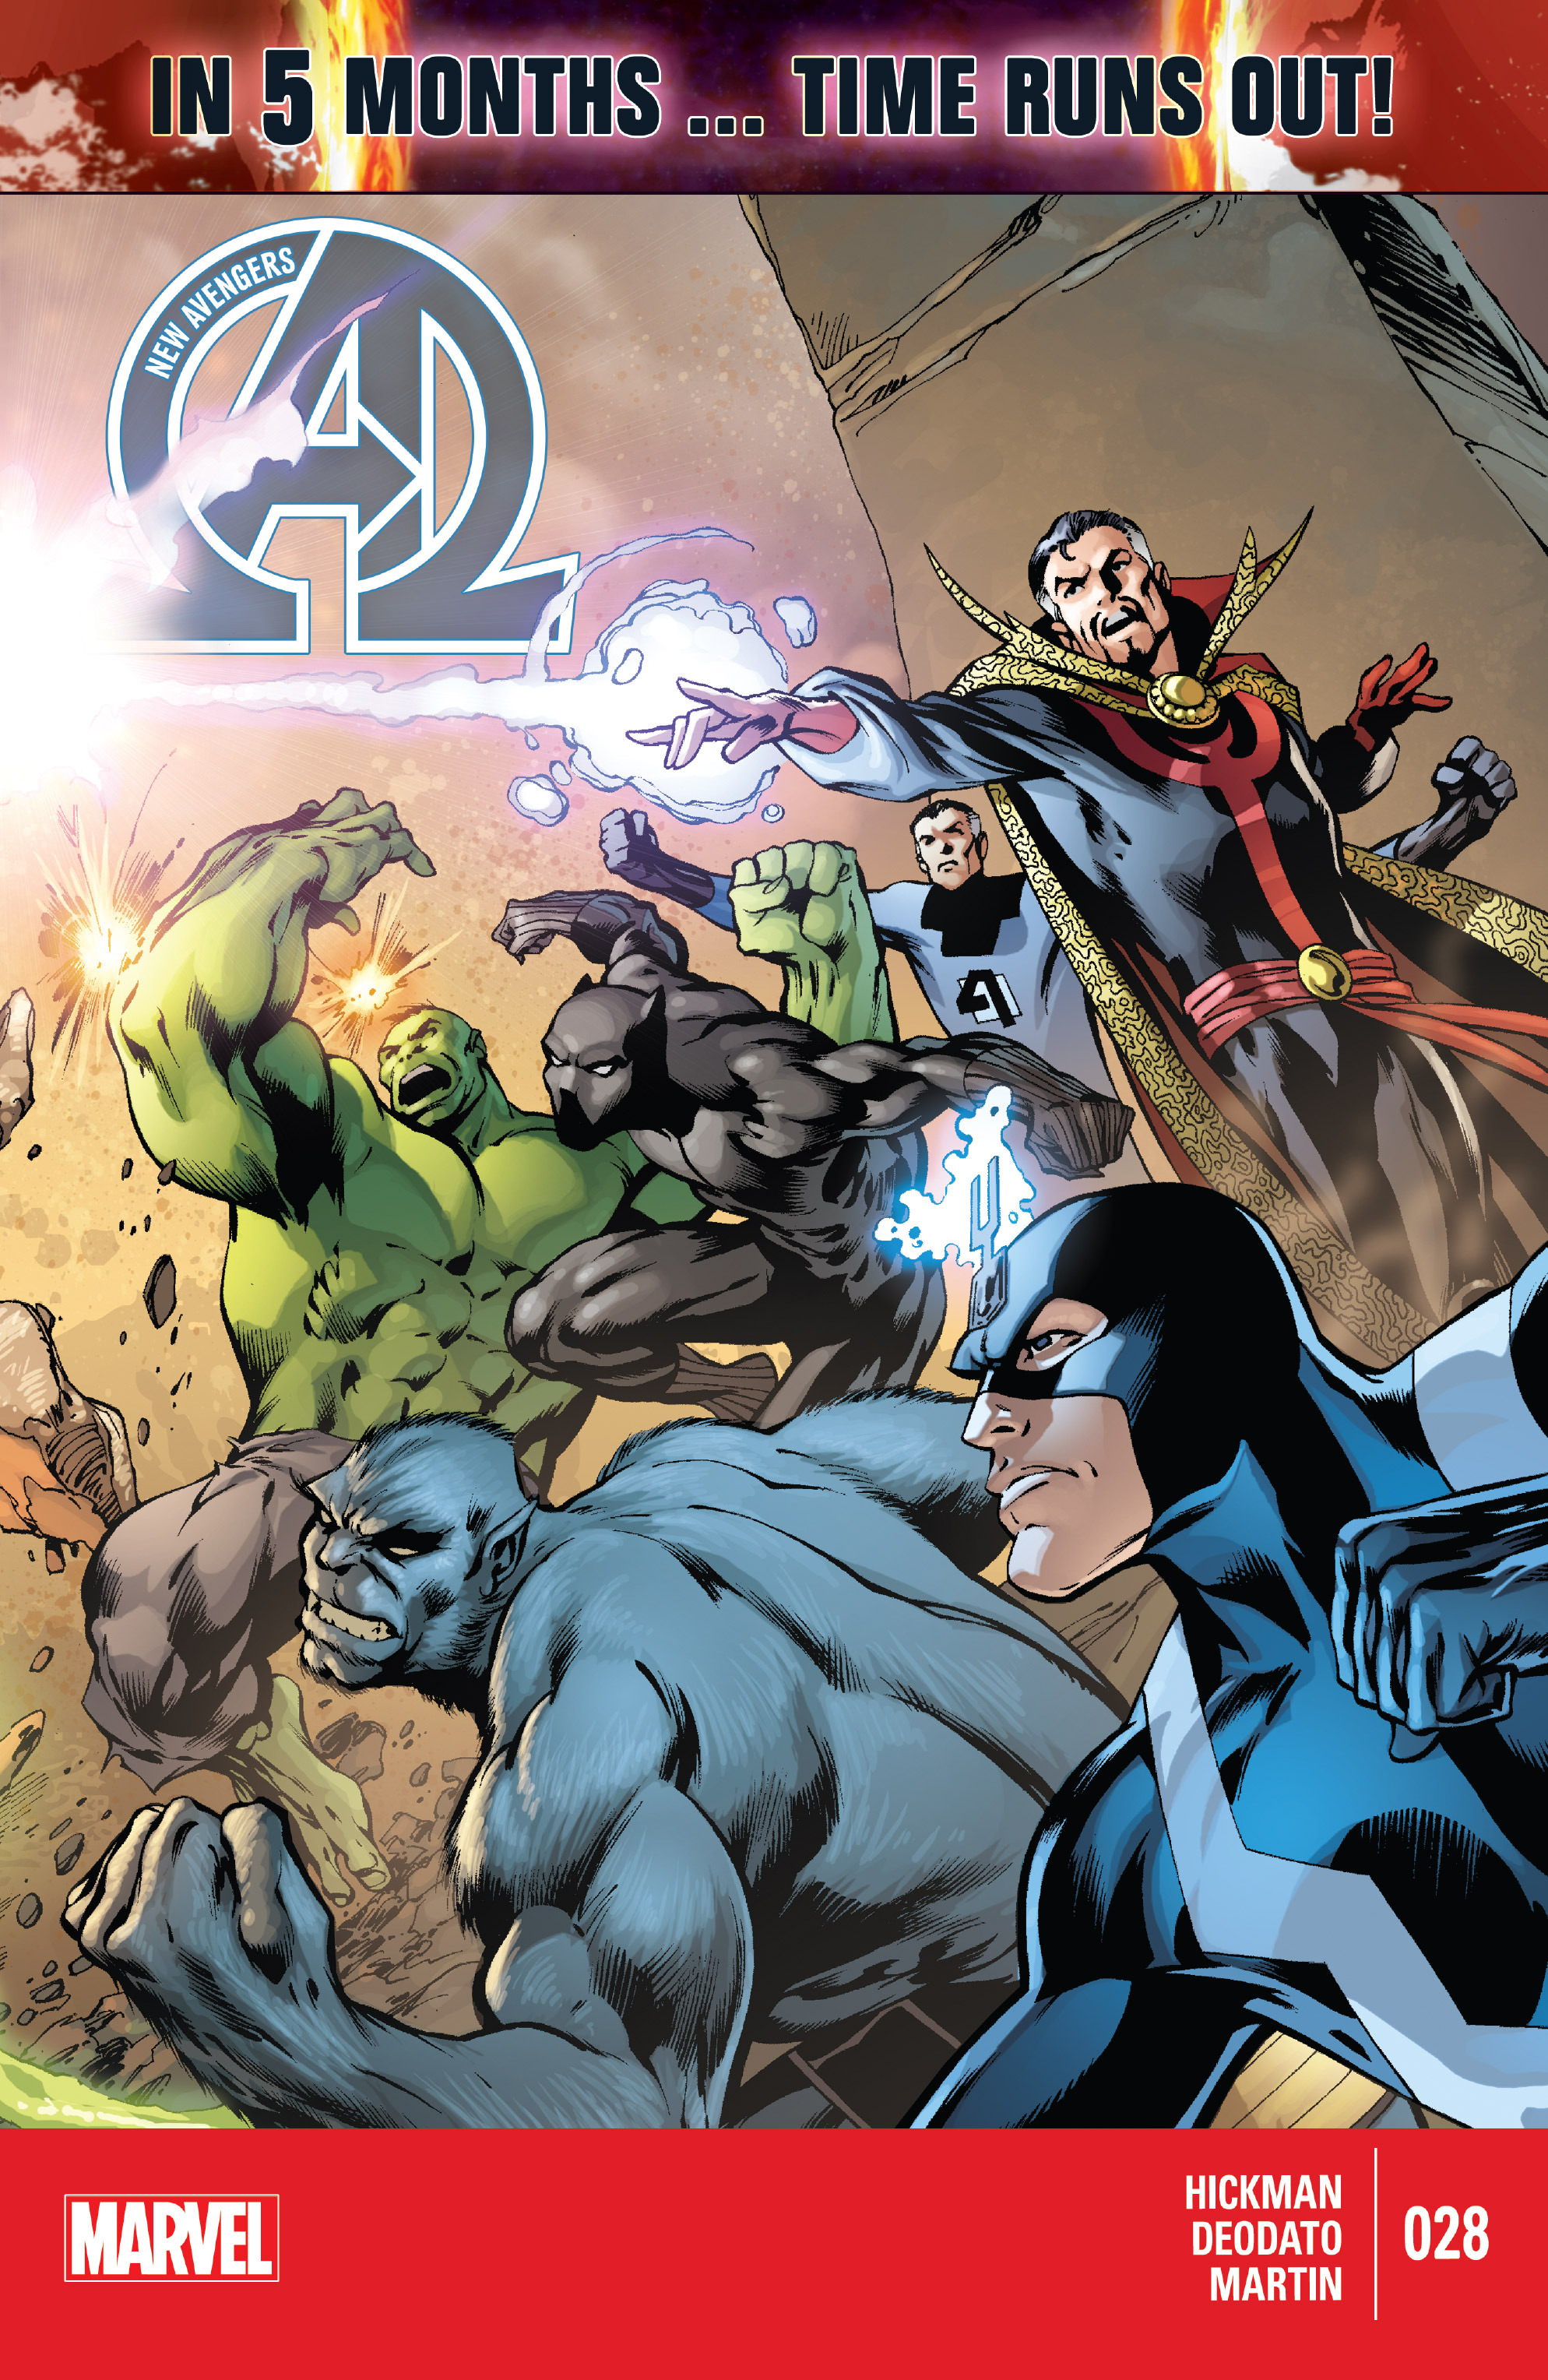 Read online Avengers: Time Runs Out comic -  Issue # TPB 2 - 100